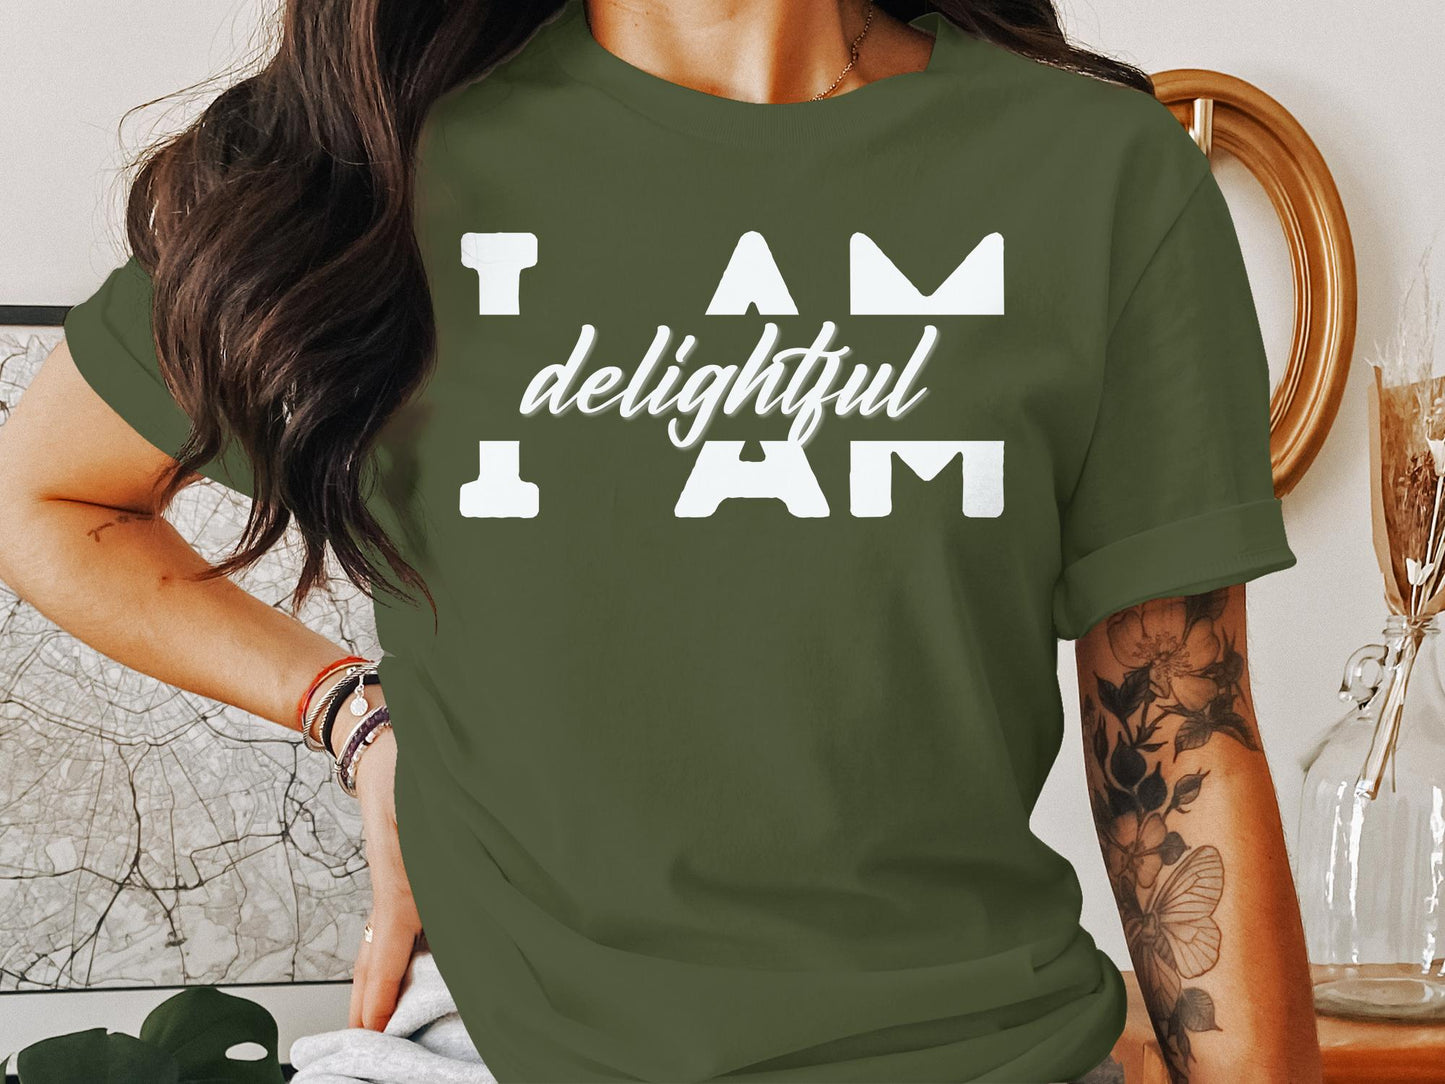 I Am Delightful - An encouraging and motivating Affirmation Quote T-shirt.